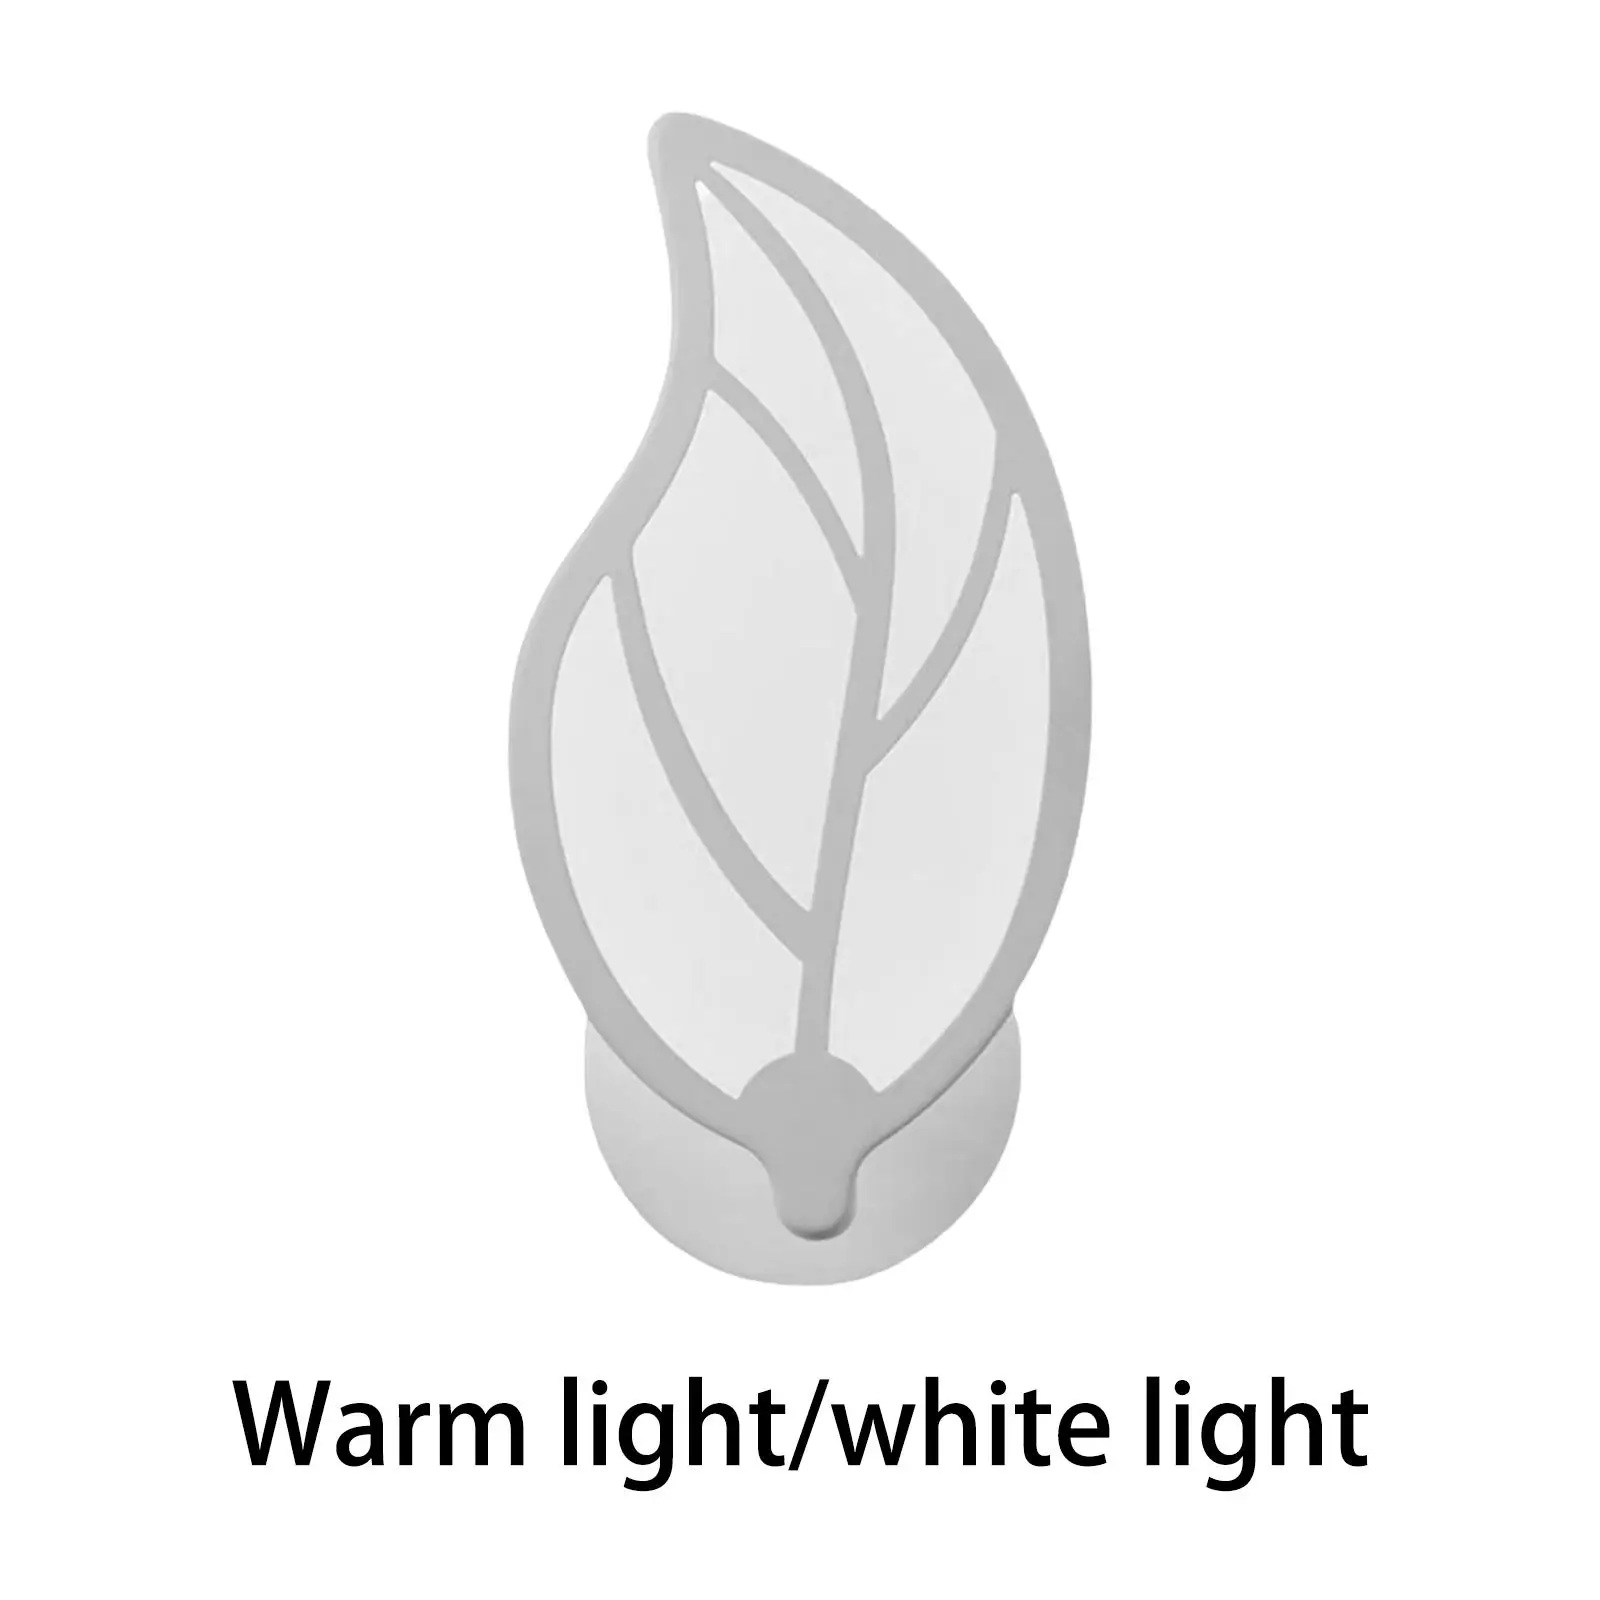 Nordic Leaves Shaped Wall Lamp Minimalist LED Wall Sconce for Hallway Home